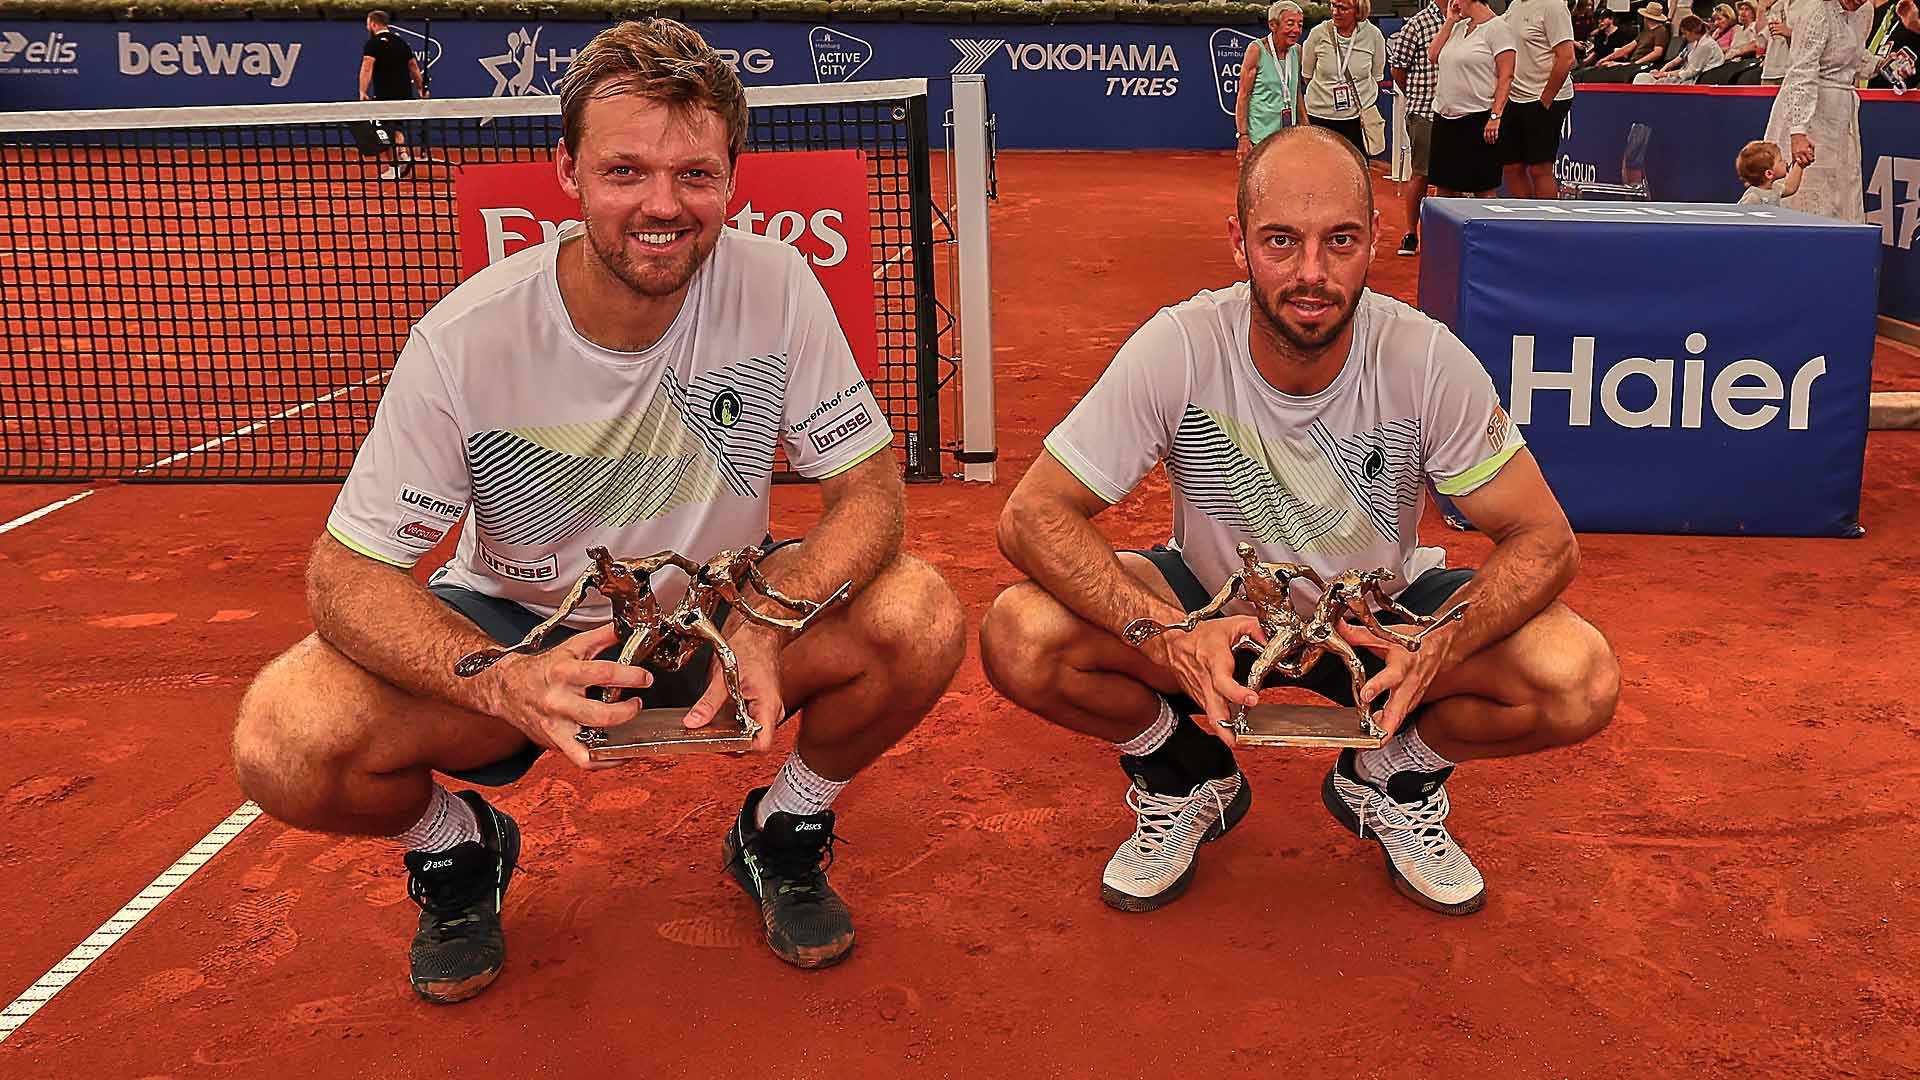 Kevin Krawietz and Tim Puetz win their second tour-level title as a team in Hamburg.